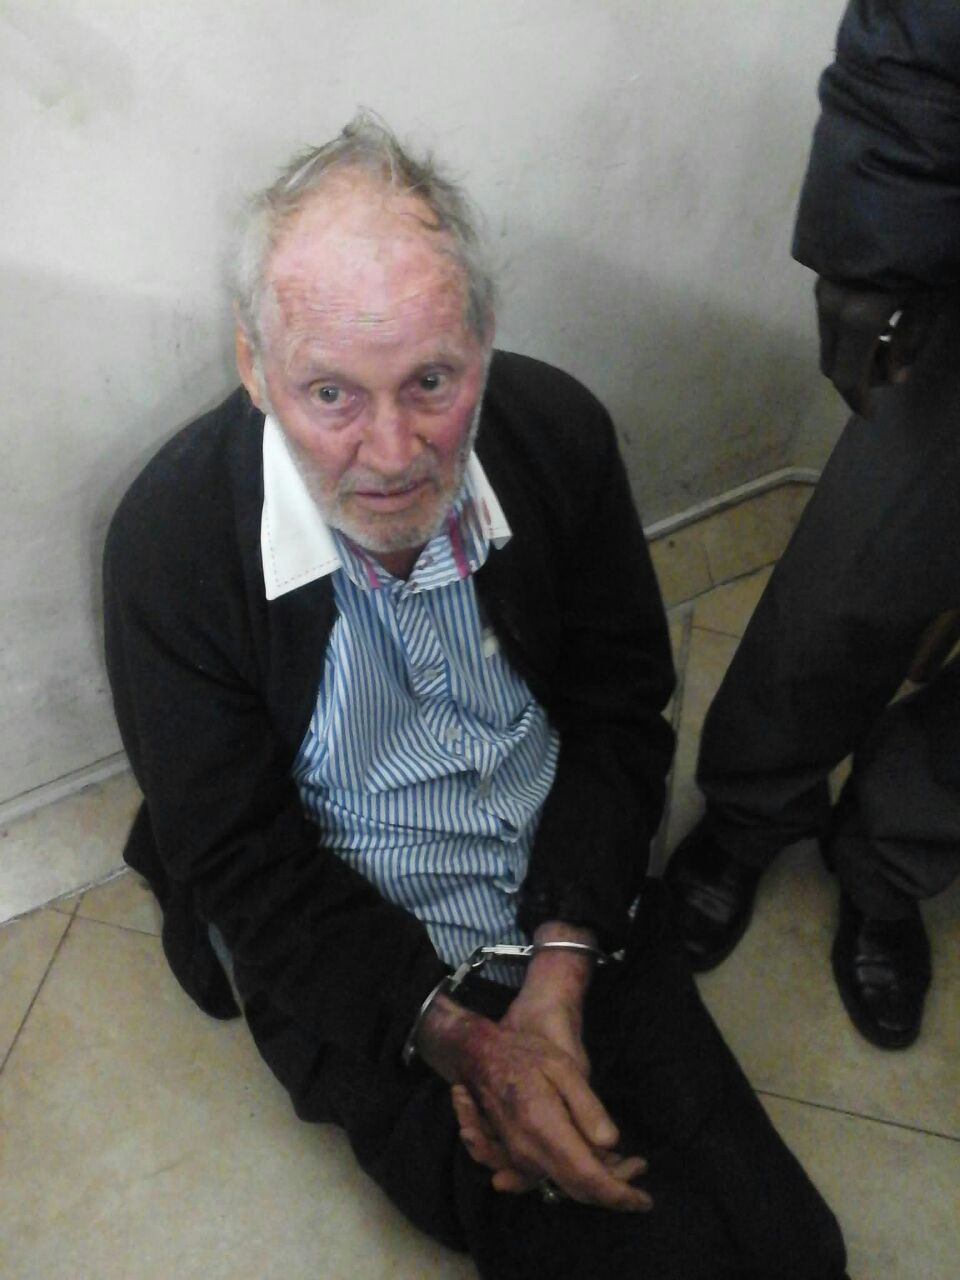 Former Zimbabwe Broadcasting Corporation (ZBC) news anchor Dave Emberton after he was arrested for allegedly trying to steal bacon at a supermarket in Harare